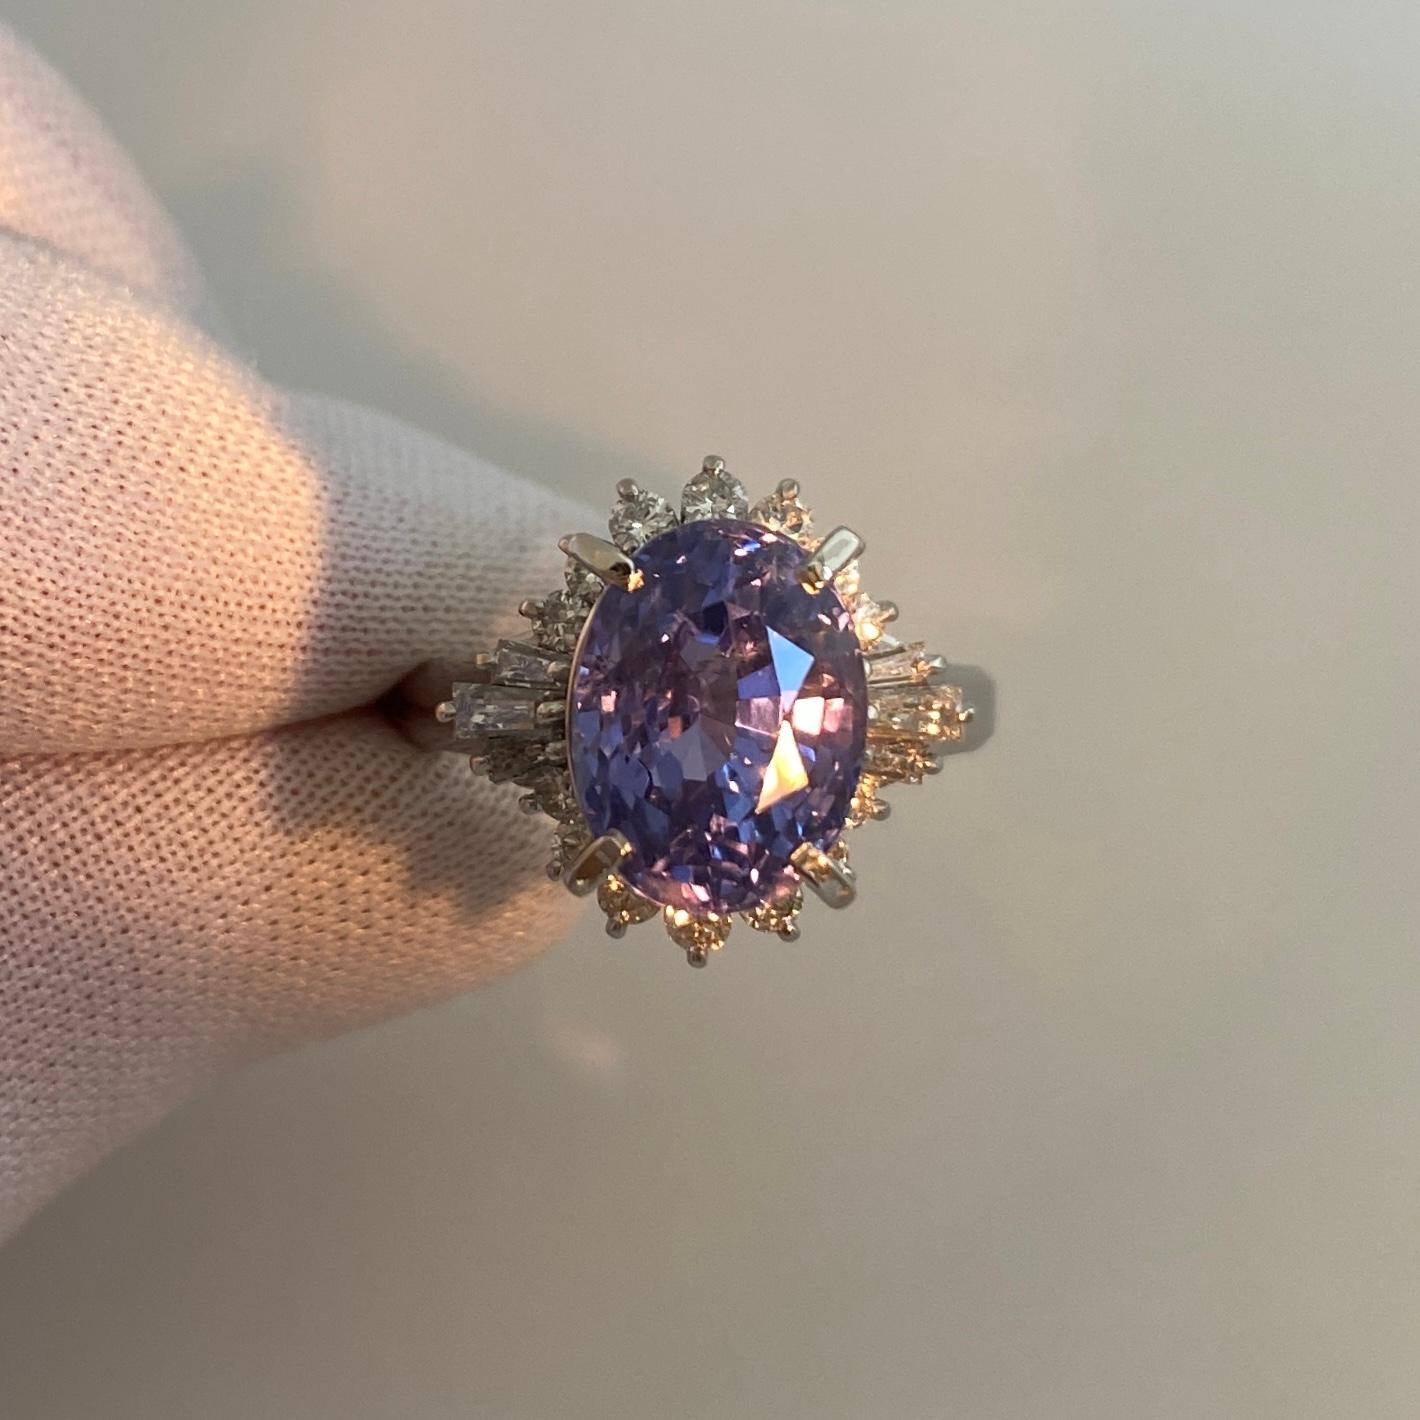 Oval Cut GIA Certified 7.08 Carat Untreated Color Change Sapphire & Diamond Cocktail Ring For Sale